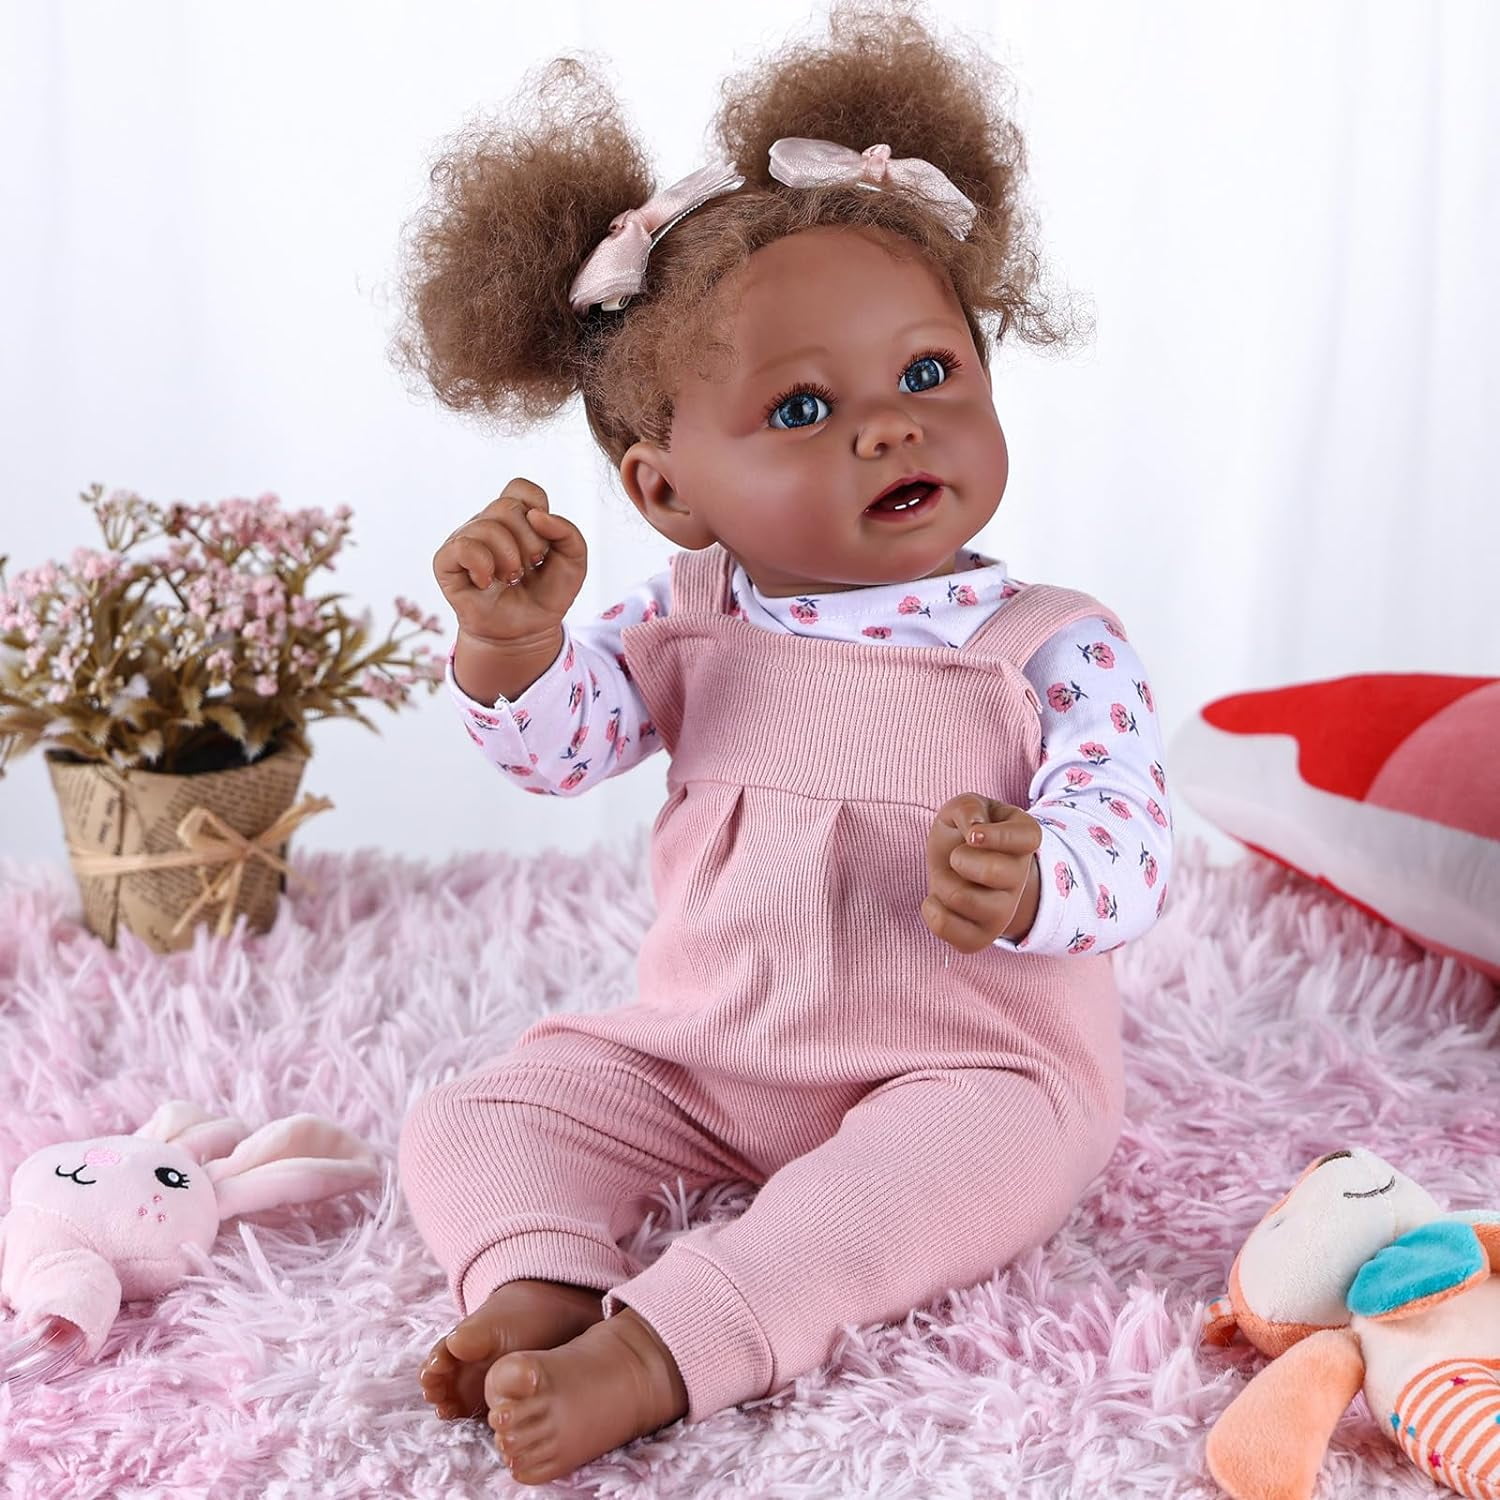 african american babies with blue eyes